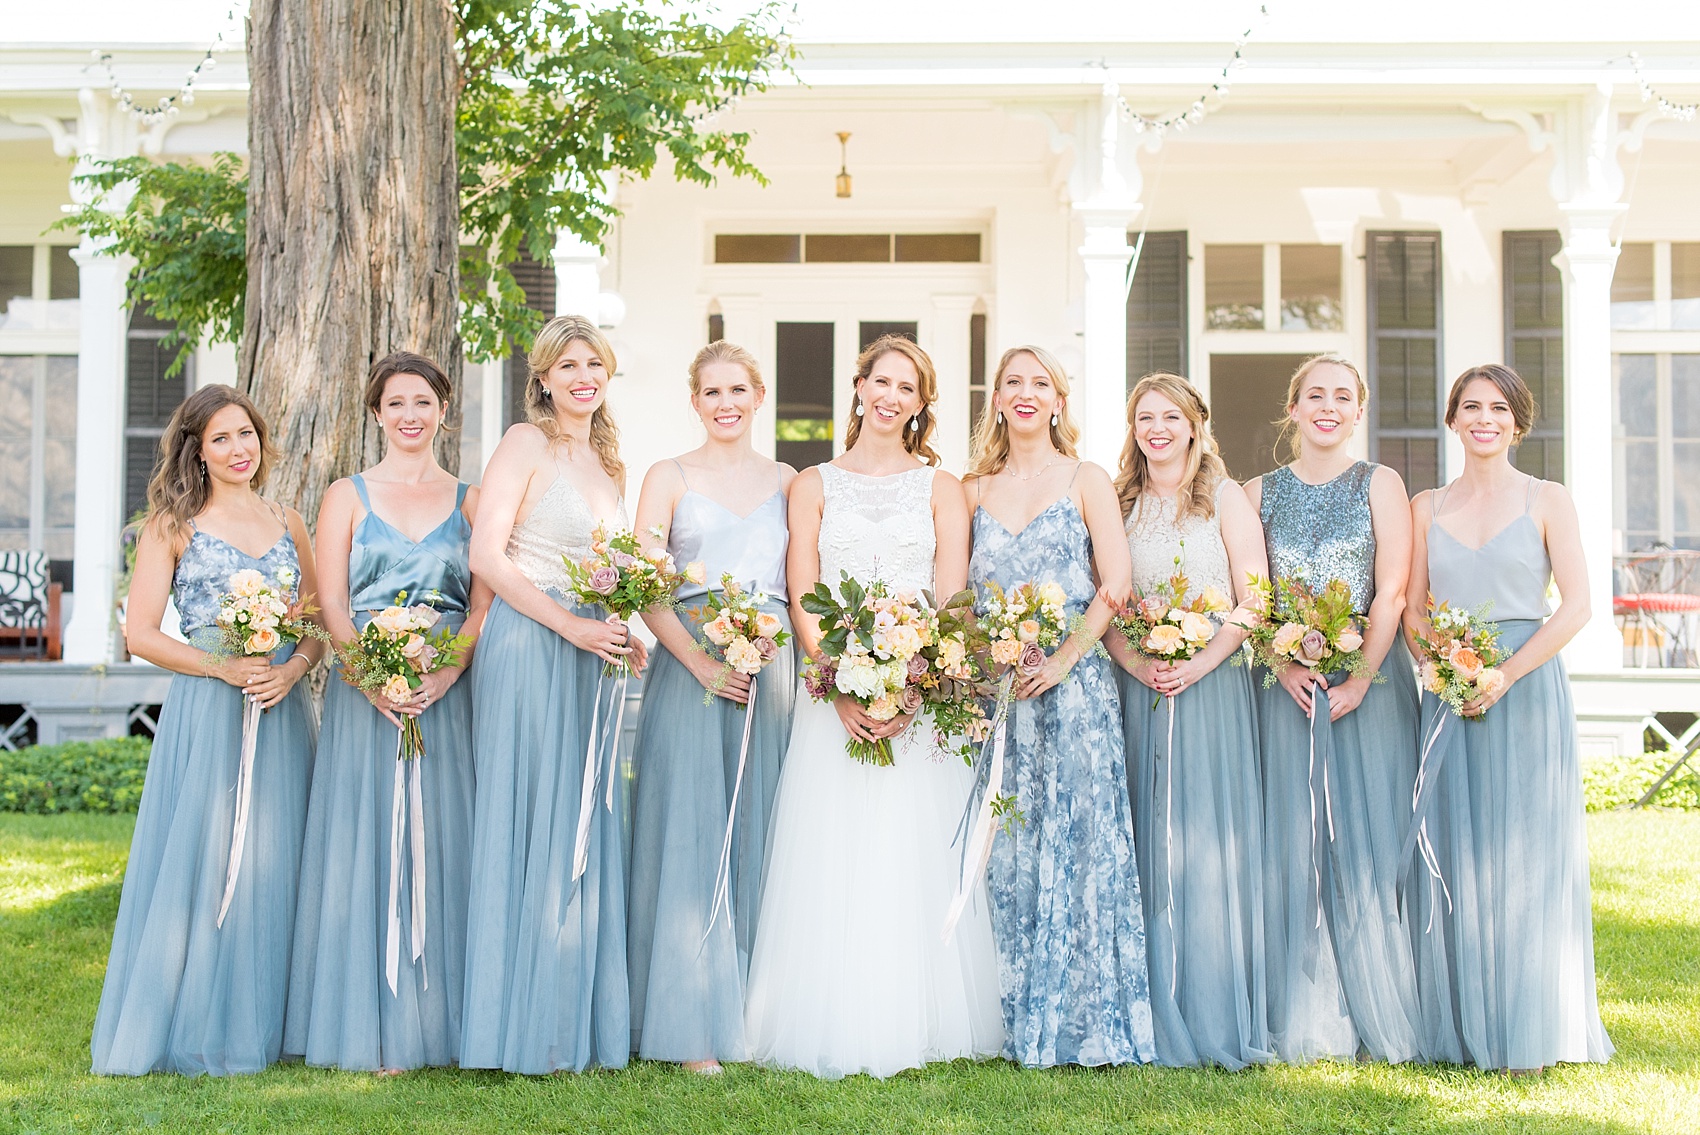 Mikkel Paige Photography photos from a wedding at Southwood Estate in Germantown, New York. Picture of the bride with her bridal party in mismatched blue gowns.